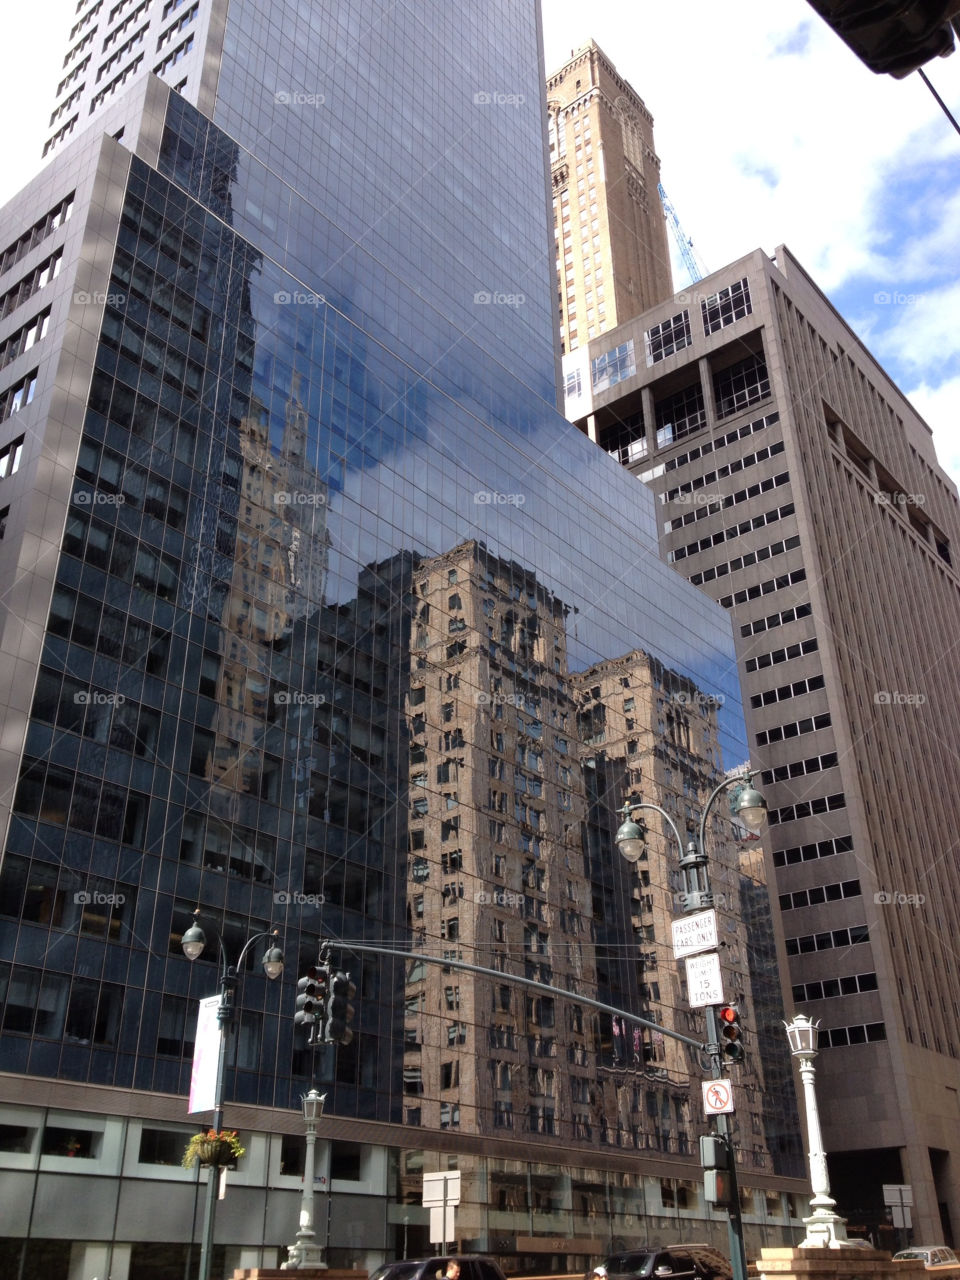 new york reflections sky scrapers grand central station by kim.huish1